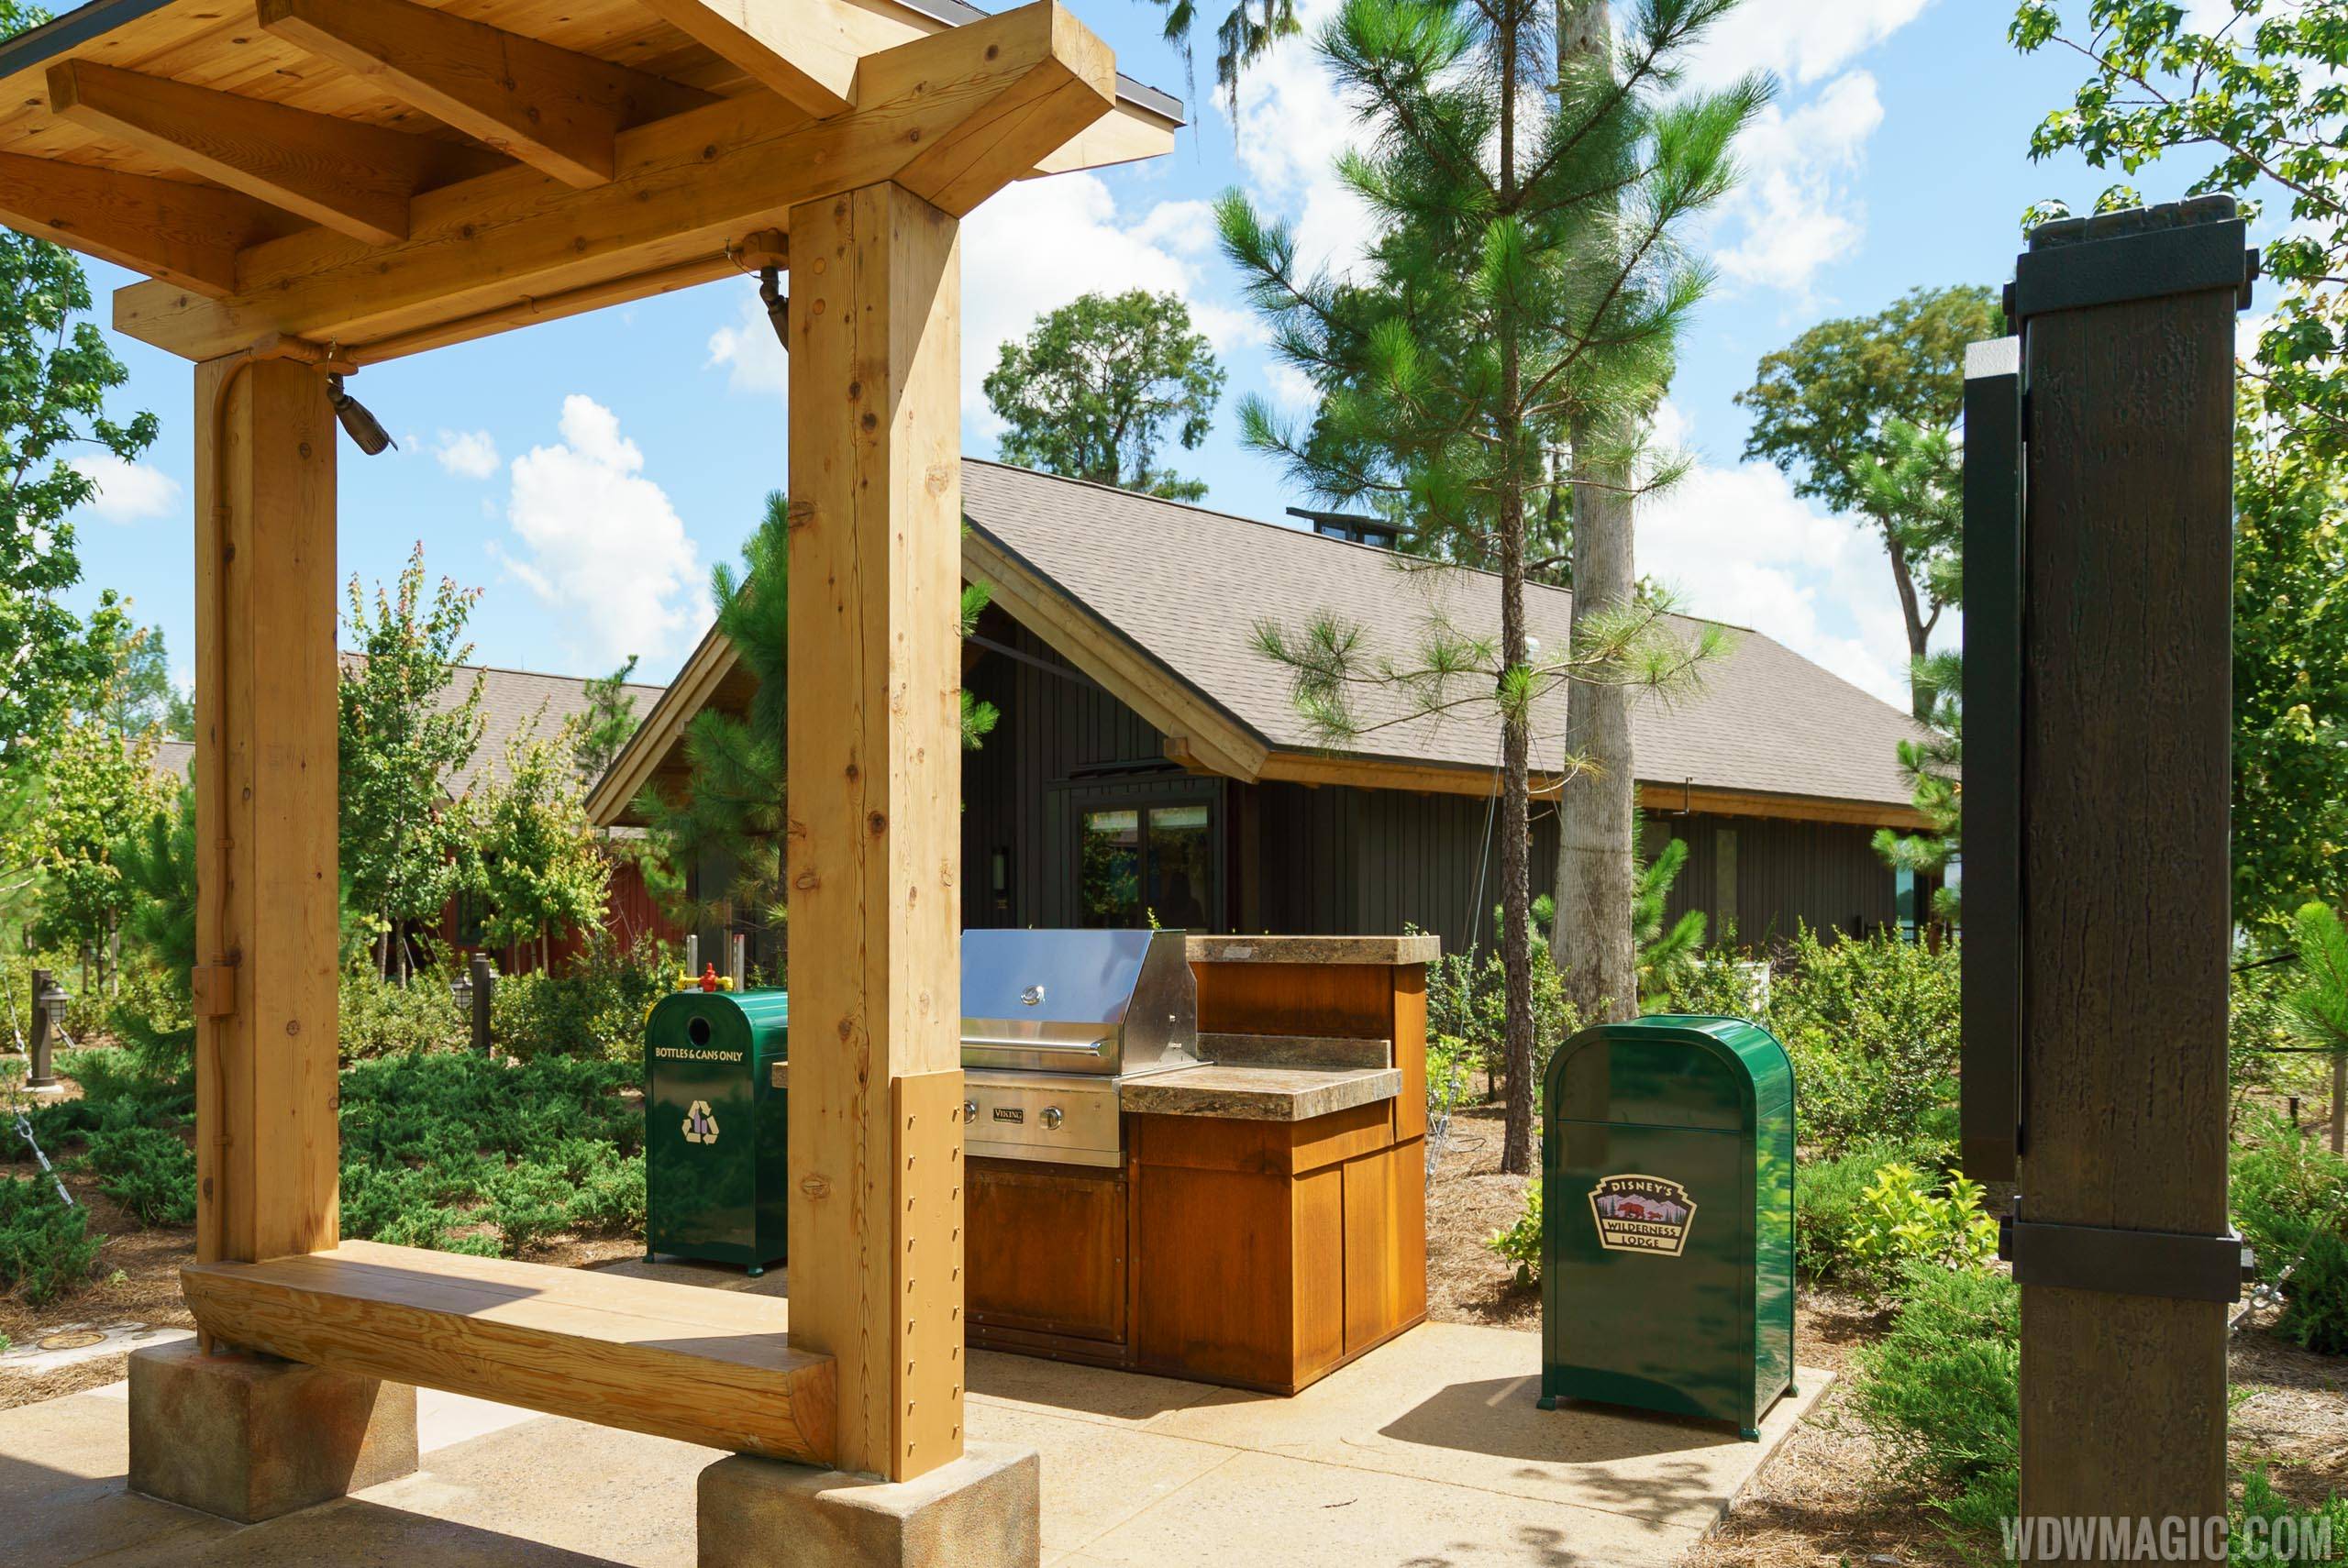 Copper Creek Villas and Cabins at Disney's Wilderness Lodge - Grilling Area at the Cabins